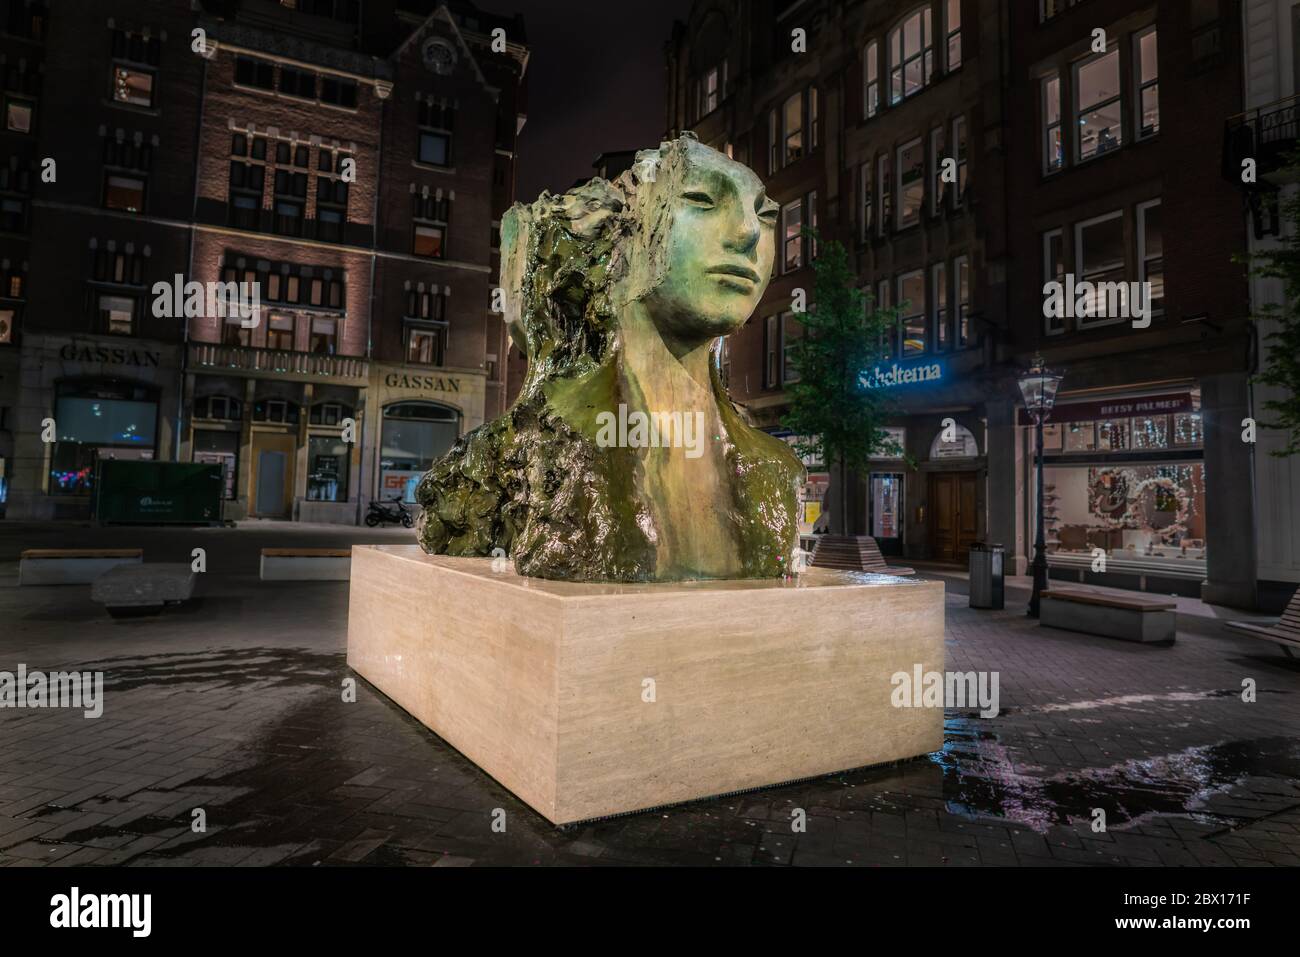 Amsterdam May 18 2018 -the new artpiece and fountain by artist Mark Manders on the Rokin in the center of Amsterdam Stock Photo